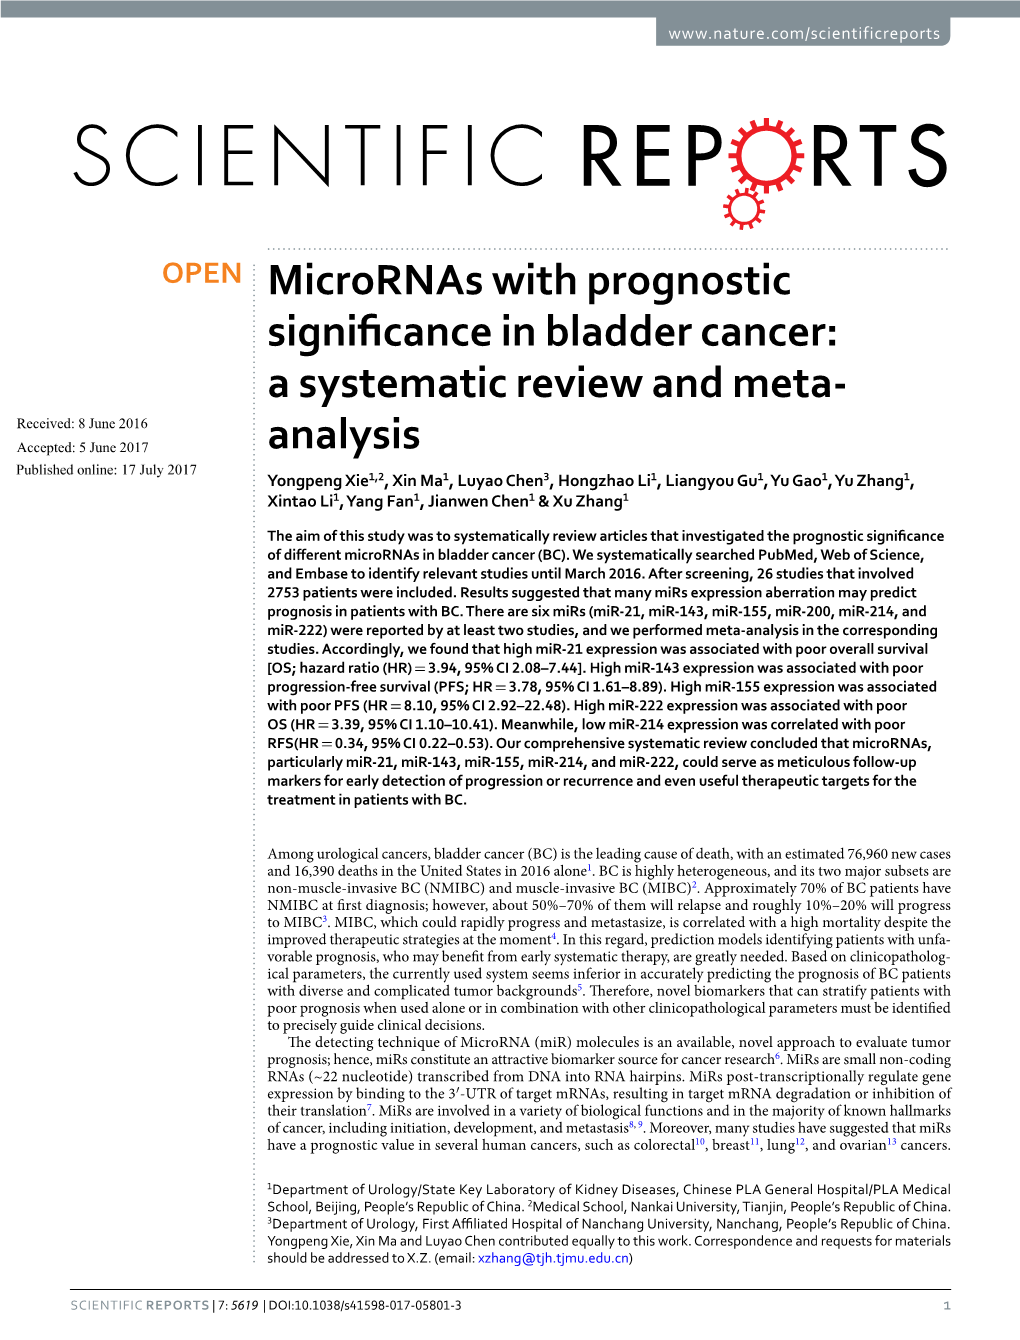 Micrornas with Prognostic Significance in Bladder Cancer